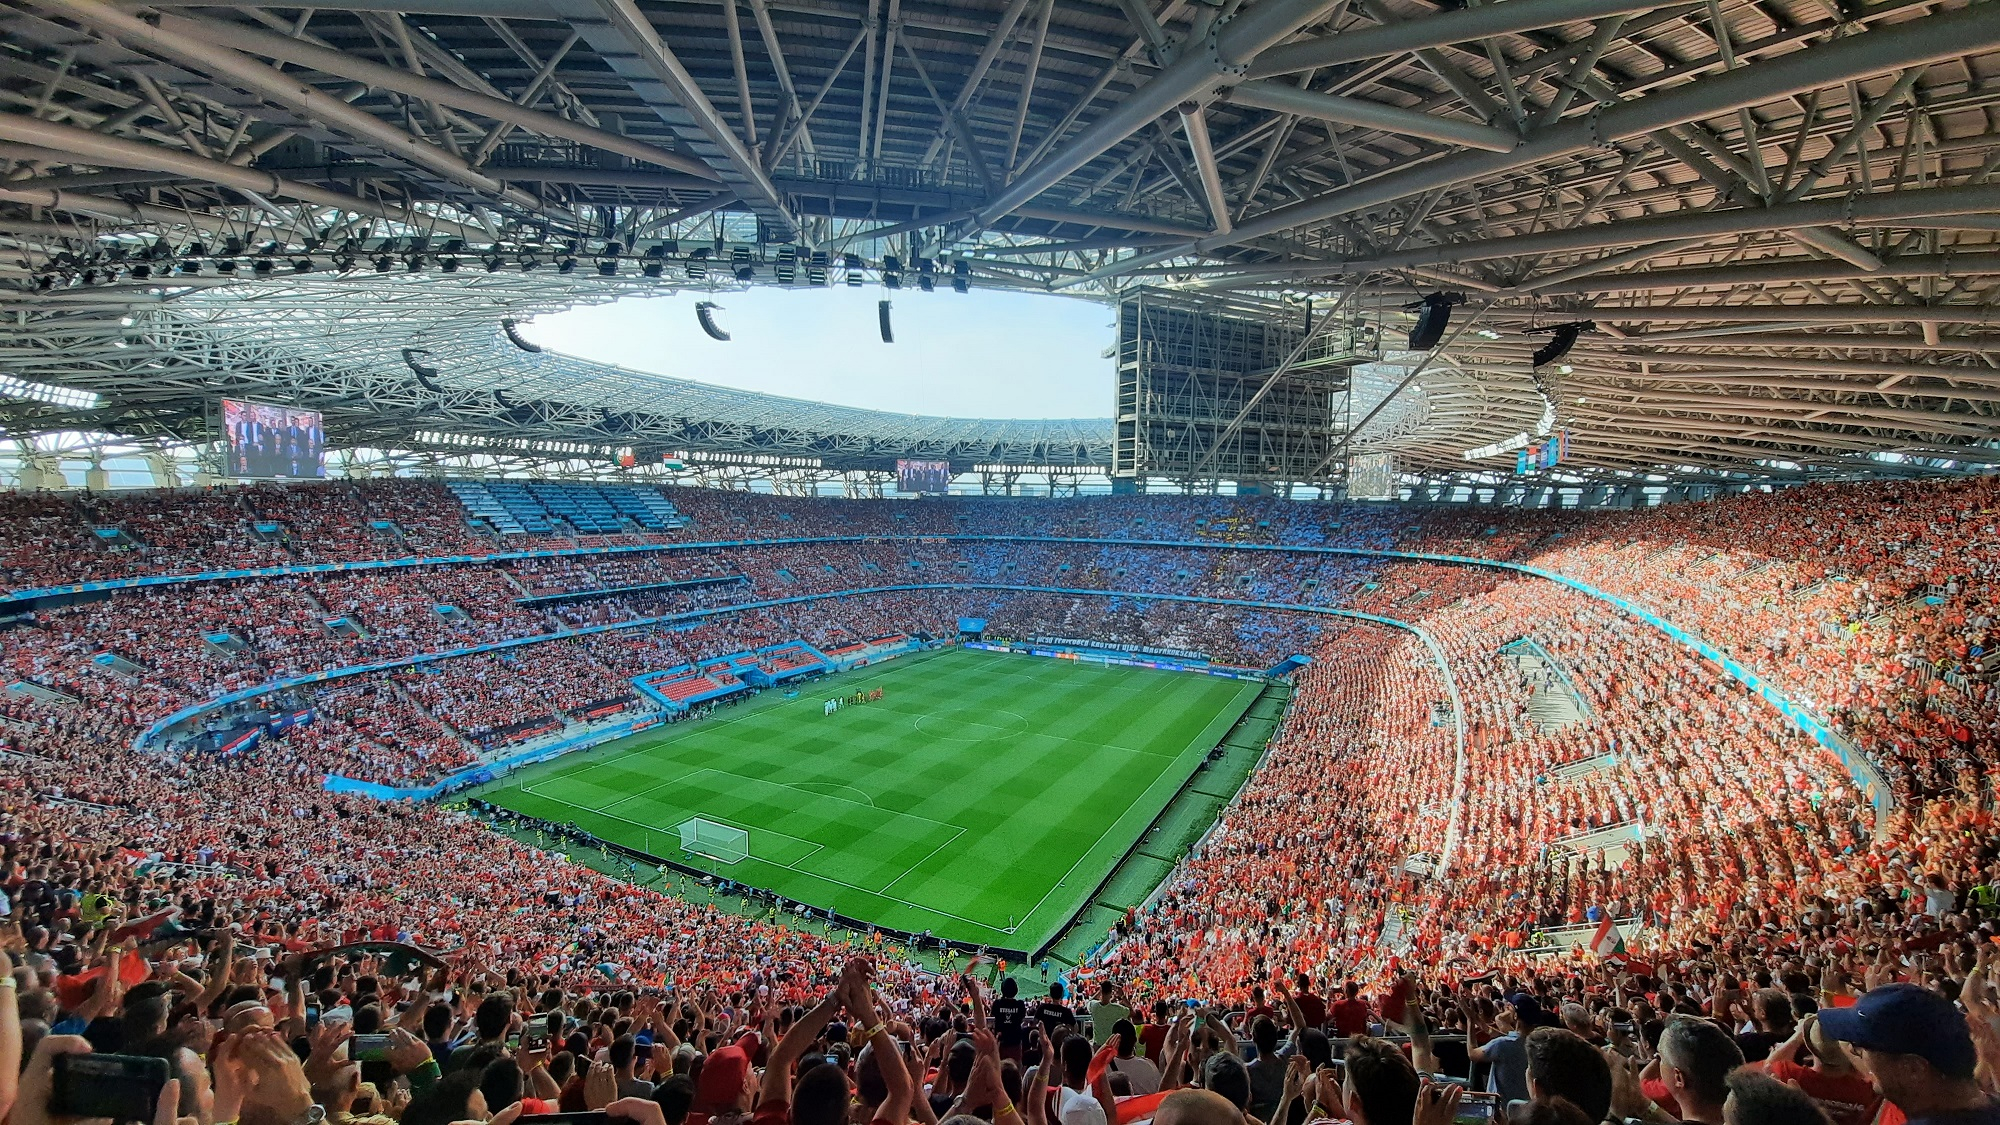 EURO 2020 was a big success in the Puskás Arena